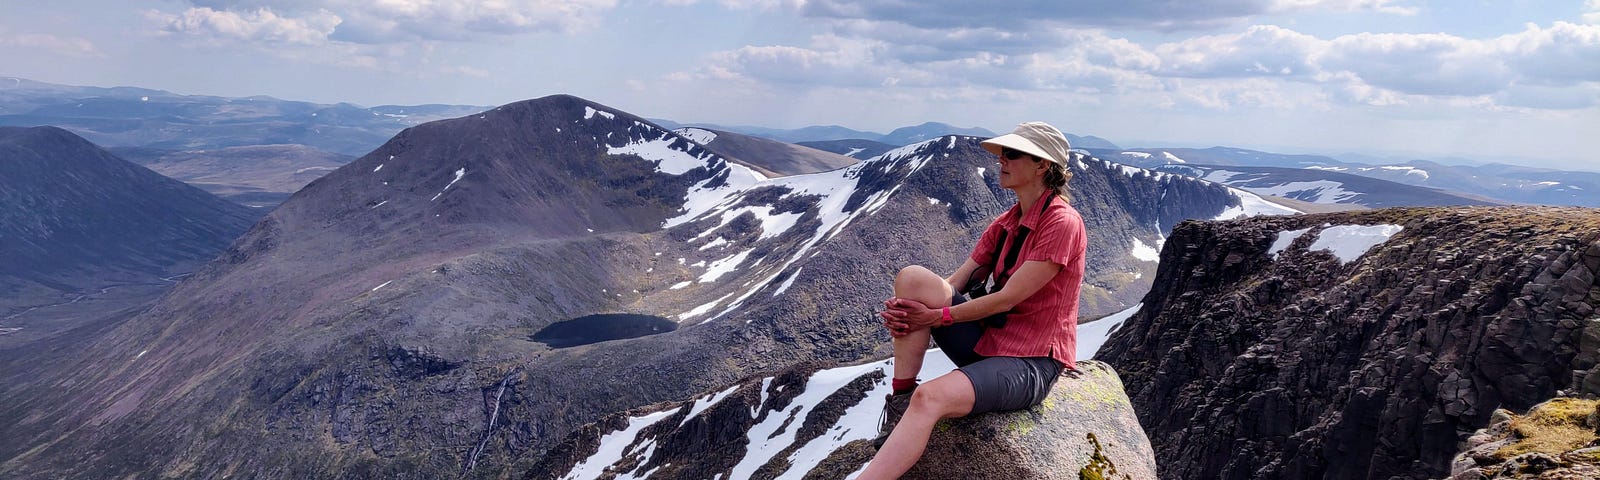 Photo of author Merryn Glover wearing hat and sunglasses, relaxing in the Cairngorms with a stunning backdrop of the mountains’ snowy peaks behind her